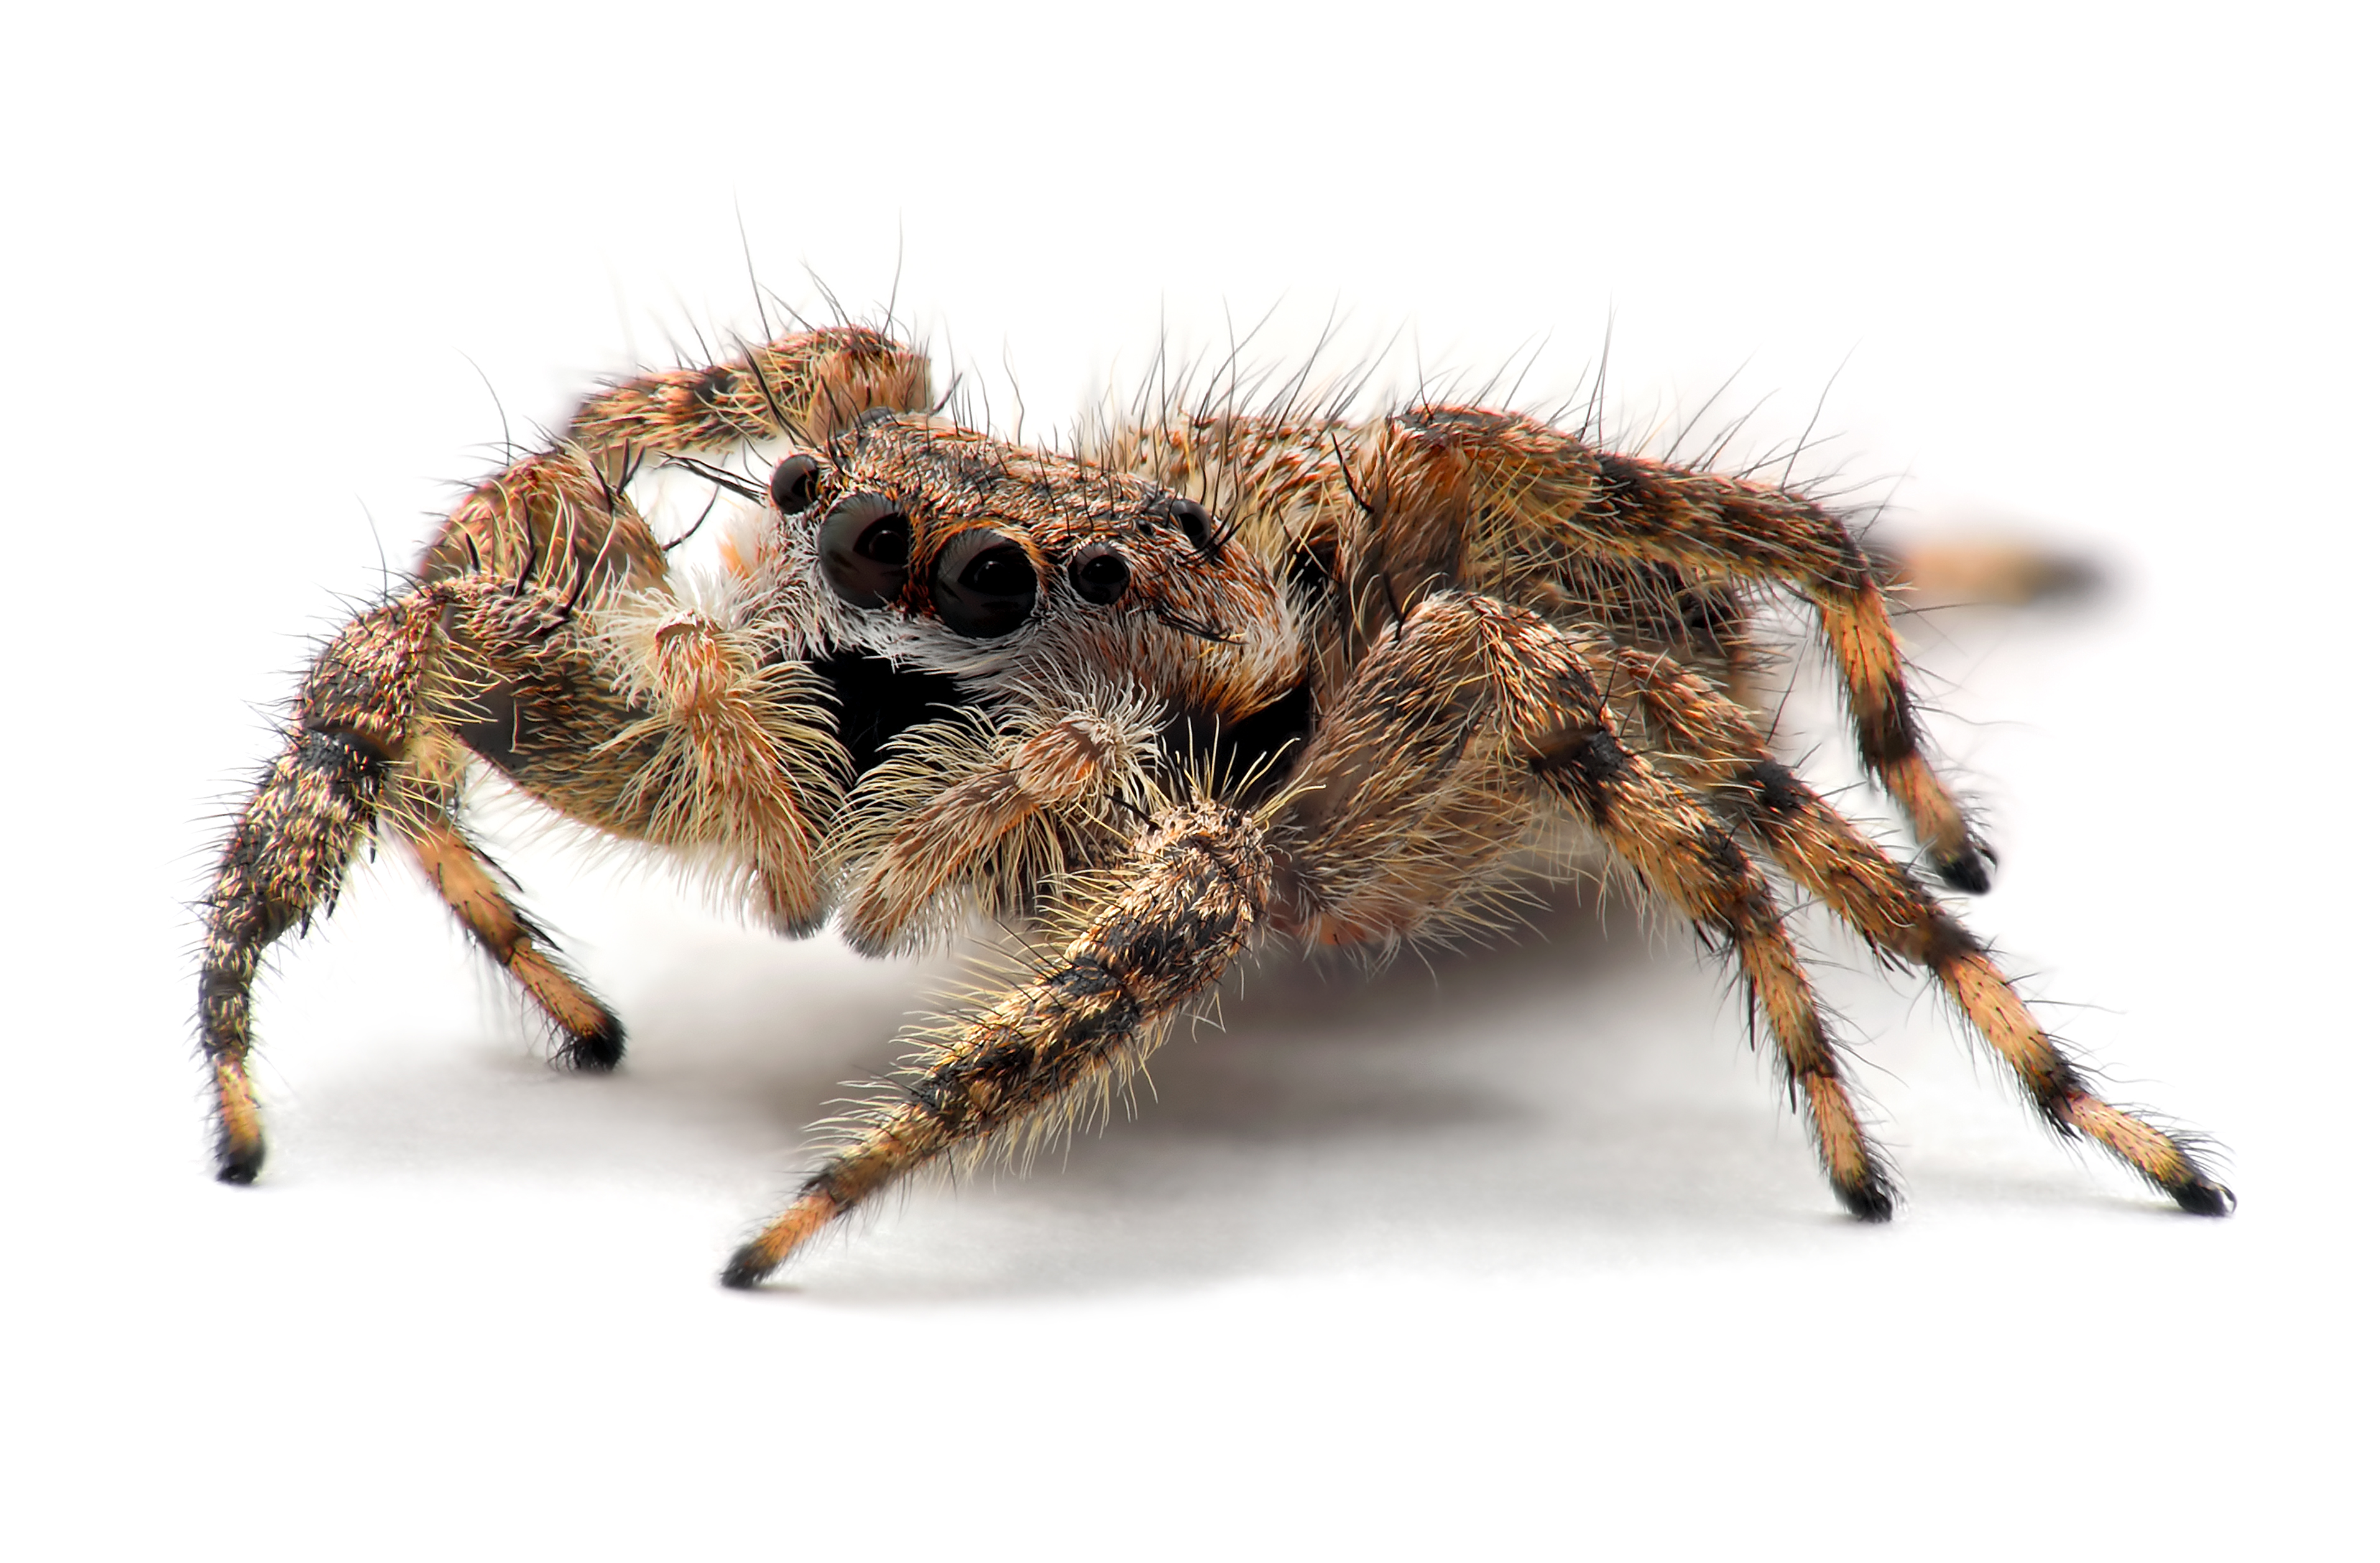 How Long Can jumping spiders jump?